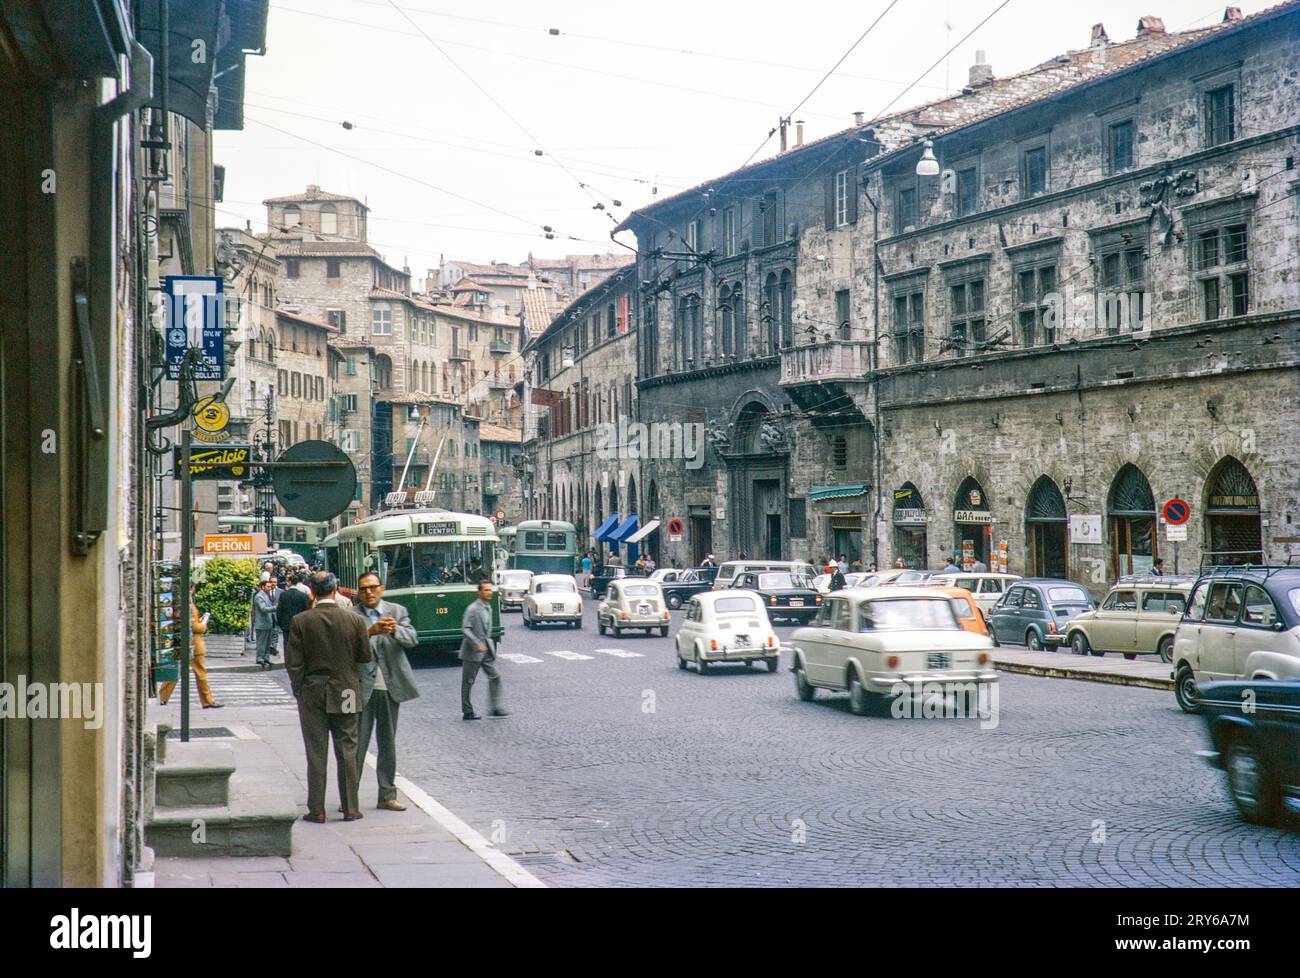 Traffic and tram cars of busy city street in Perugia, Umbria, Italy 1969 Stock Photo